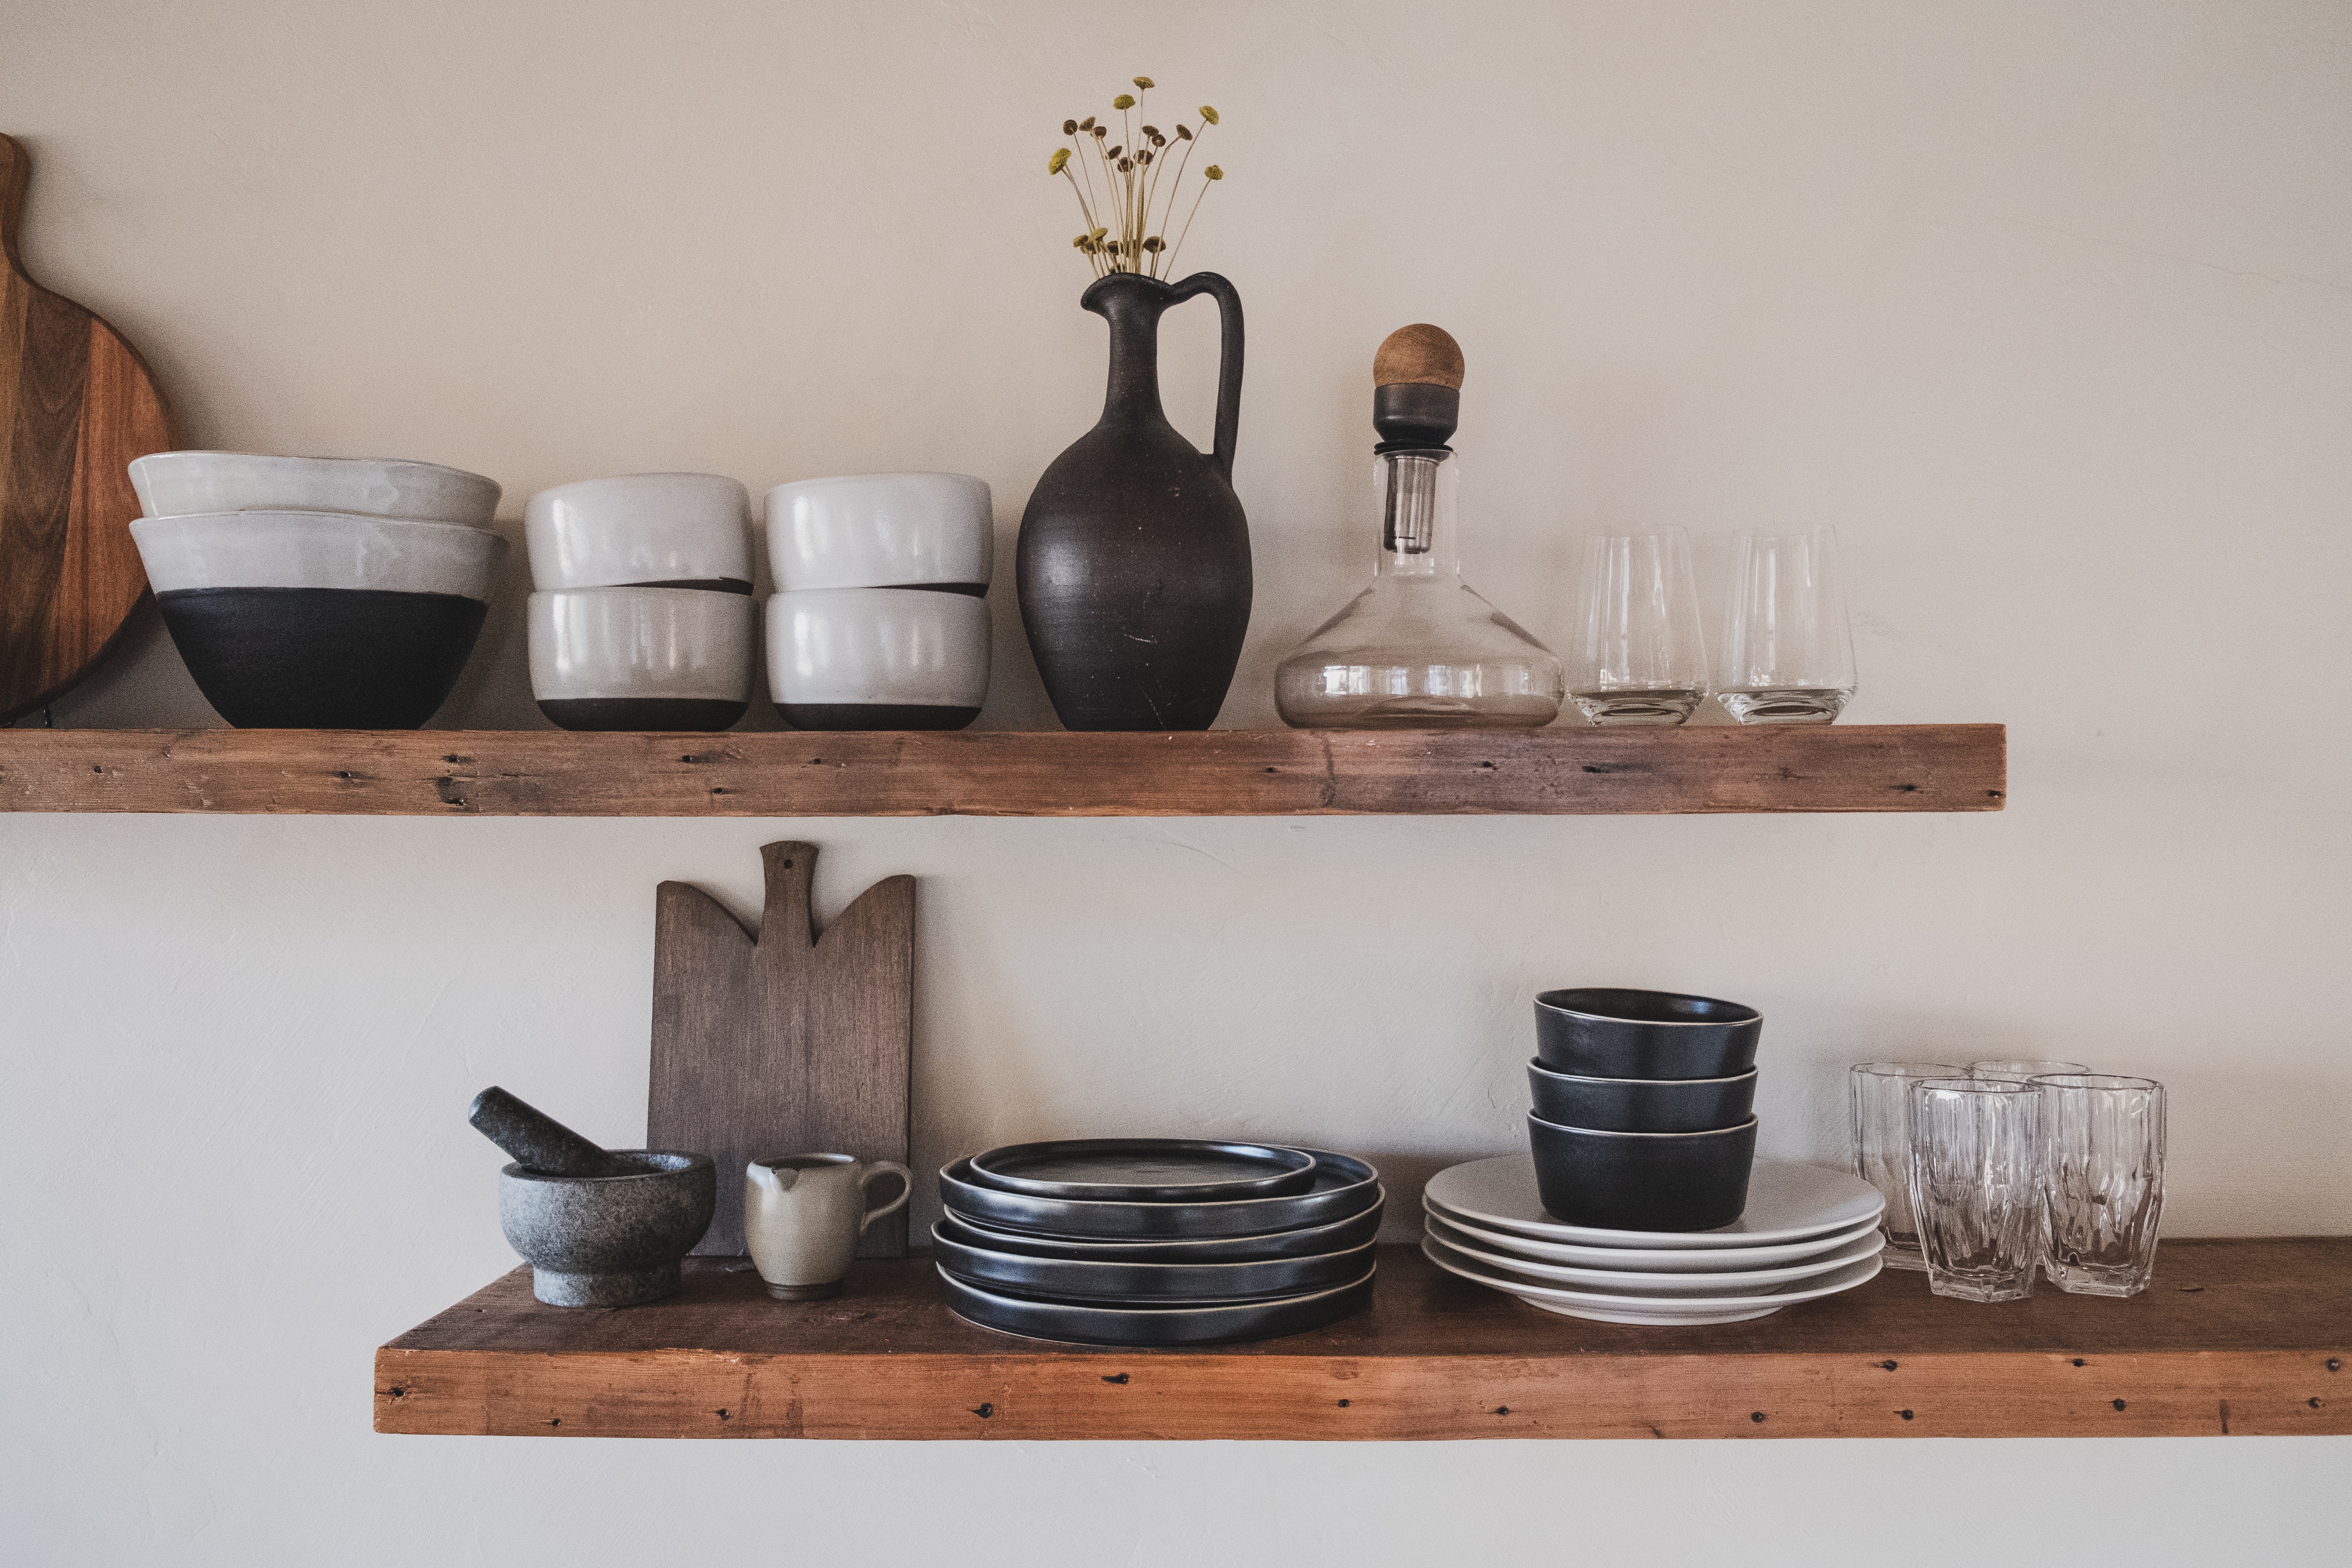 Shop for Dinnerware, Aprons, and More in Redmond